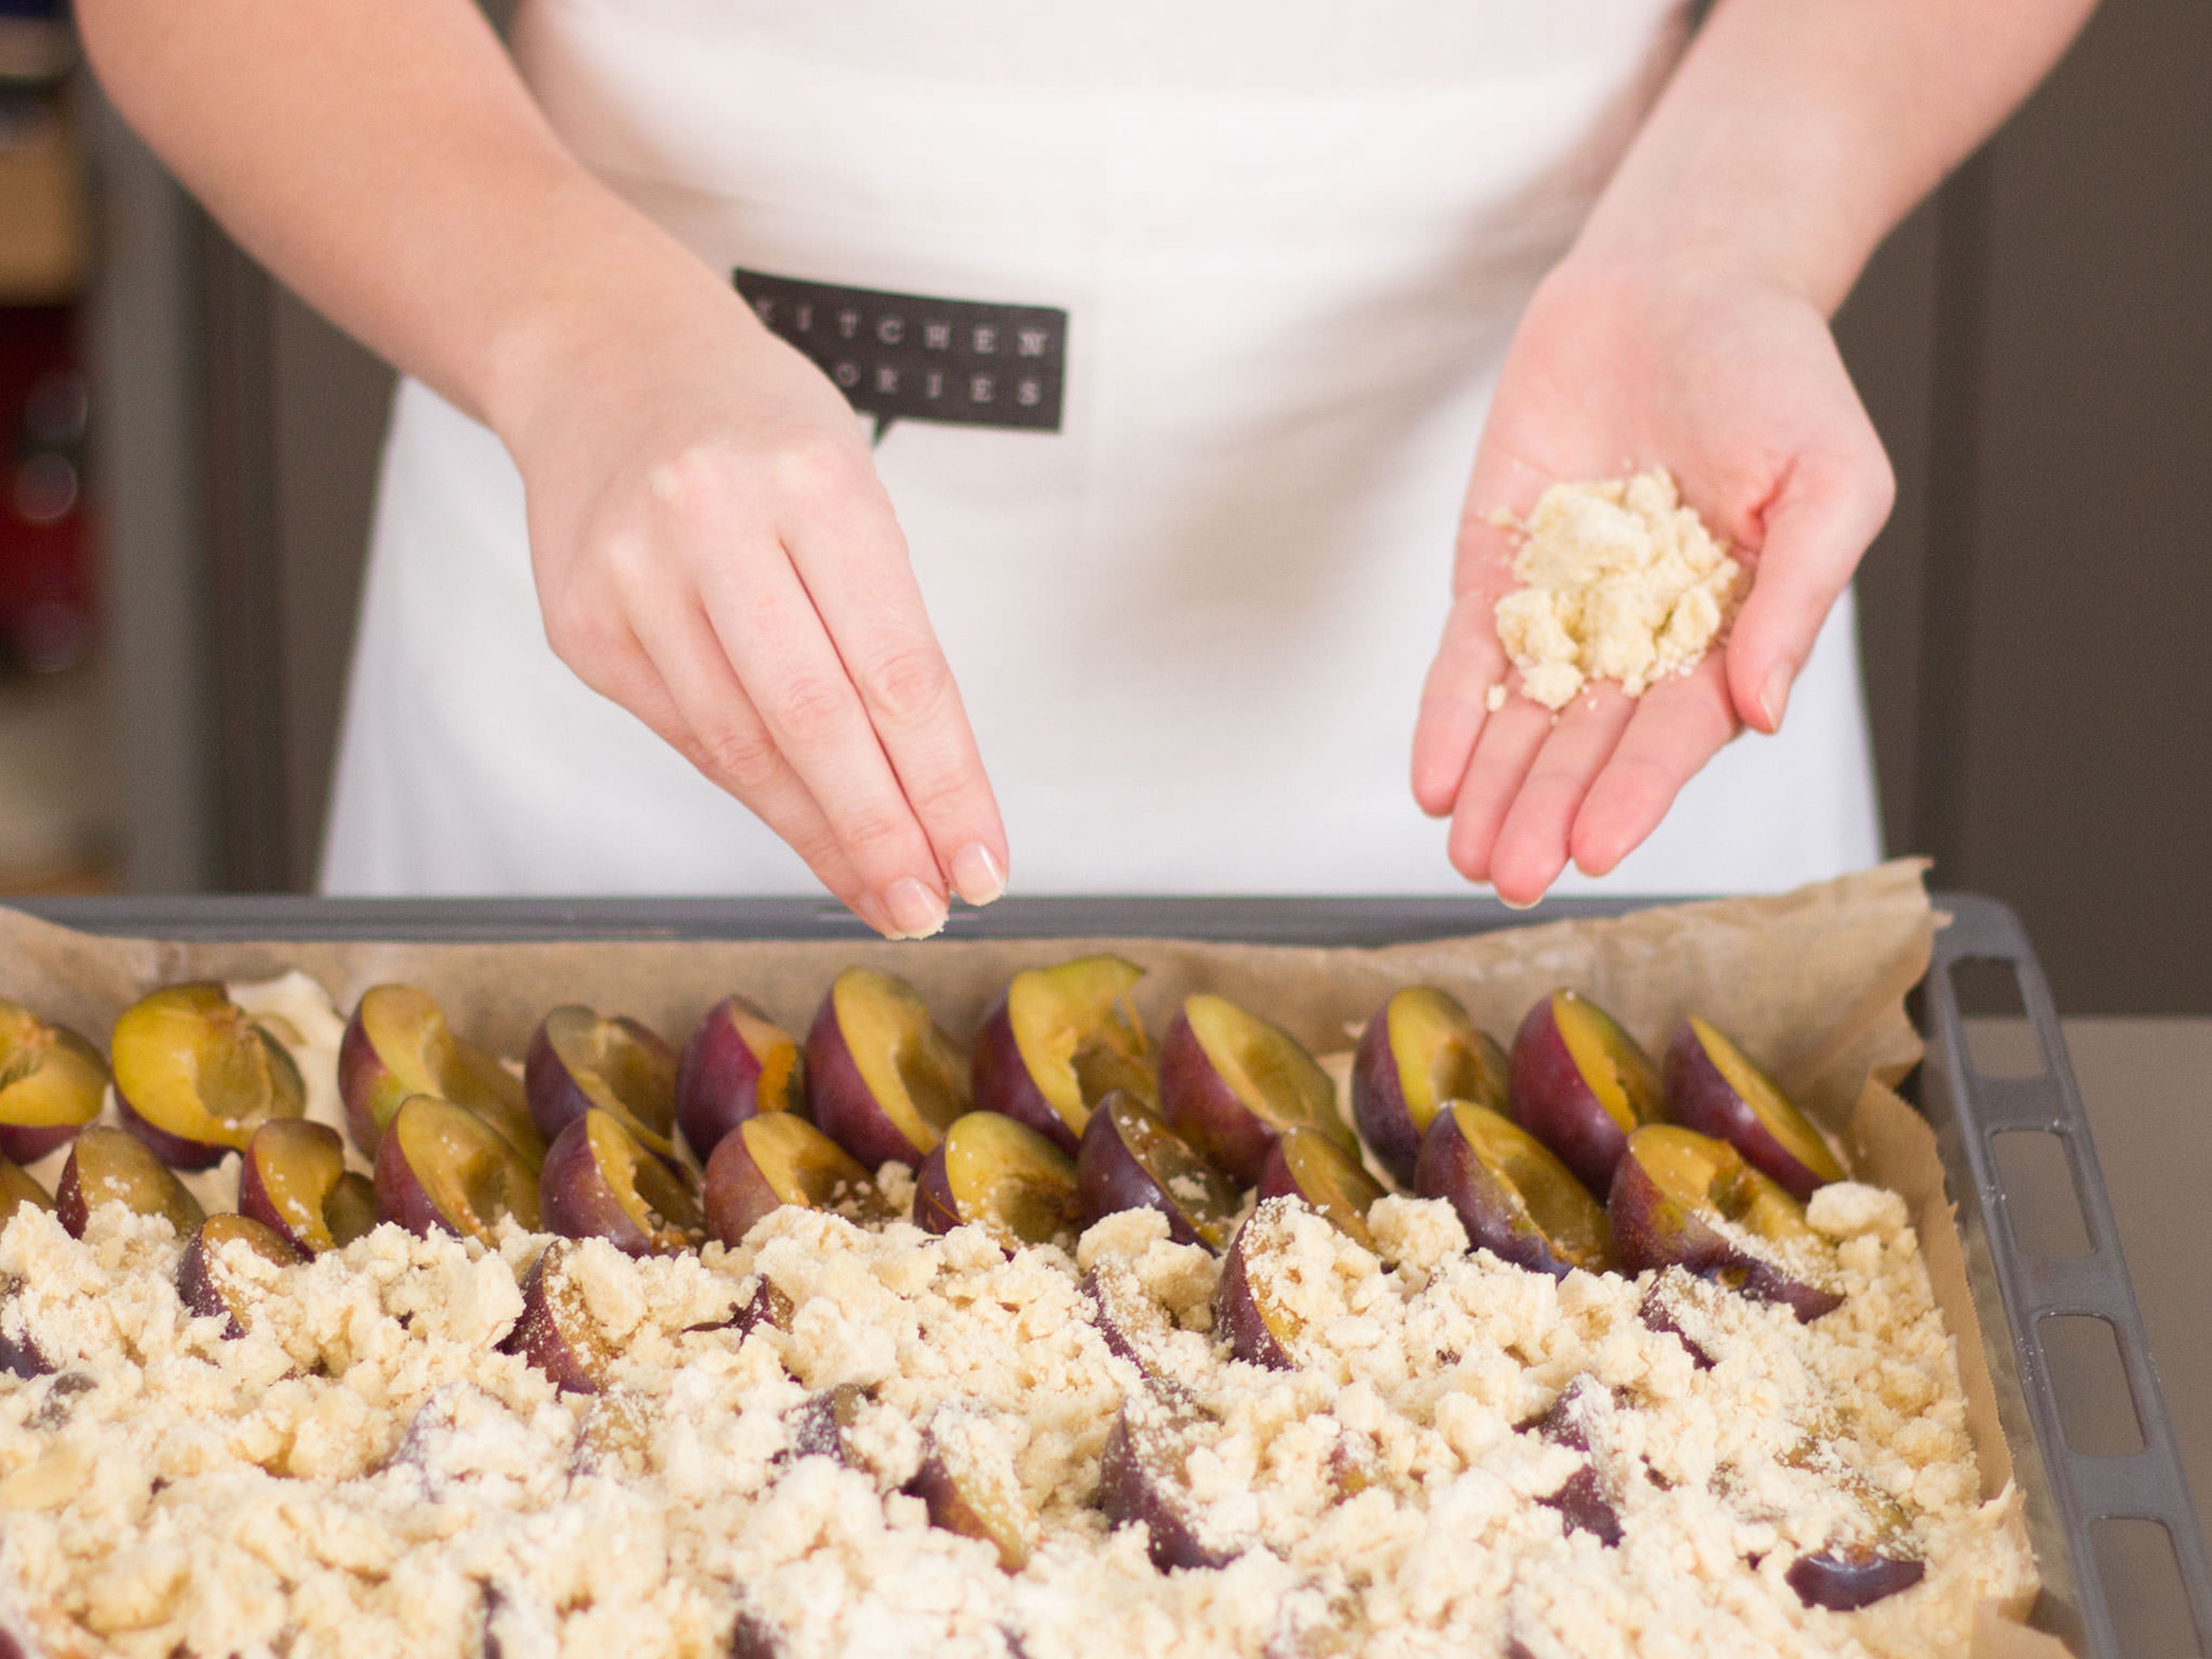 Arrange plum halves on the dough in overlapping rows, cut side facing up. Sprinkle a thick layer of crumbles on top of the cake and bake in preheated oven at 180°C/350°F for approx. 1 h. Dust with confectioner’s sugar before serving and enjoy with whipped cream or vanilla ice cream, if desired.